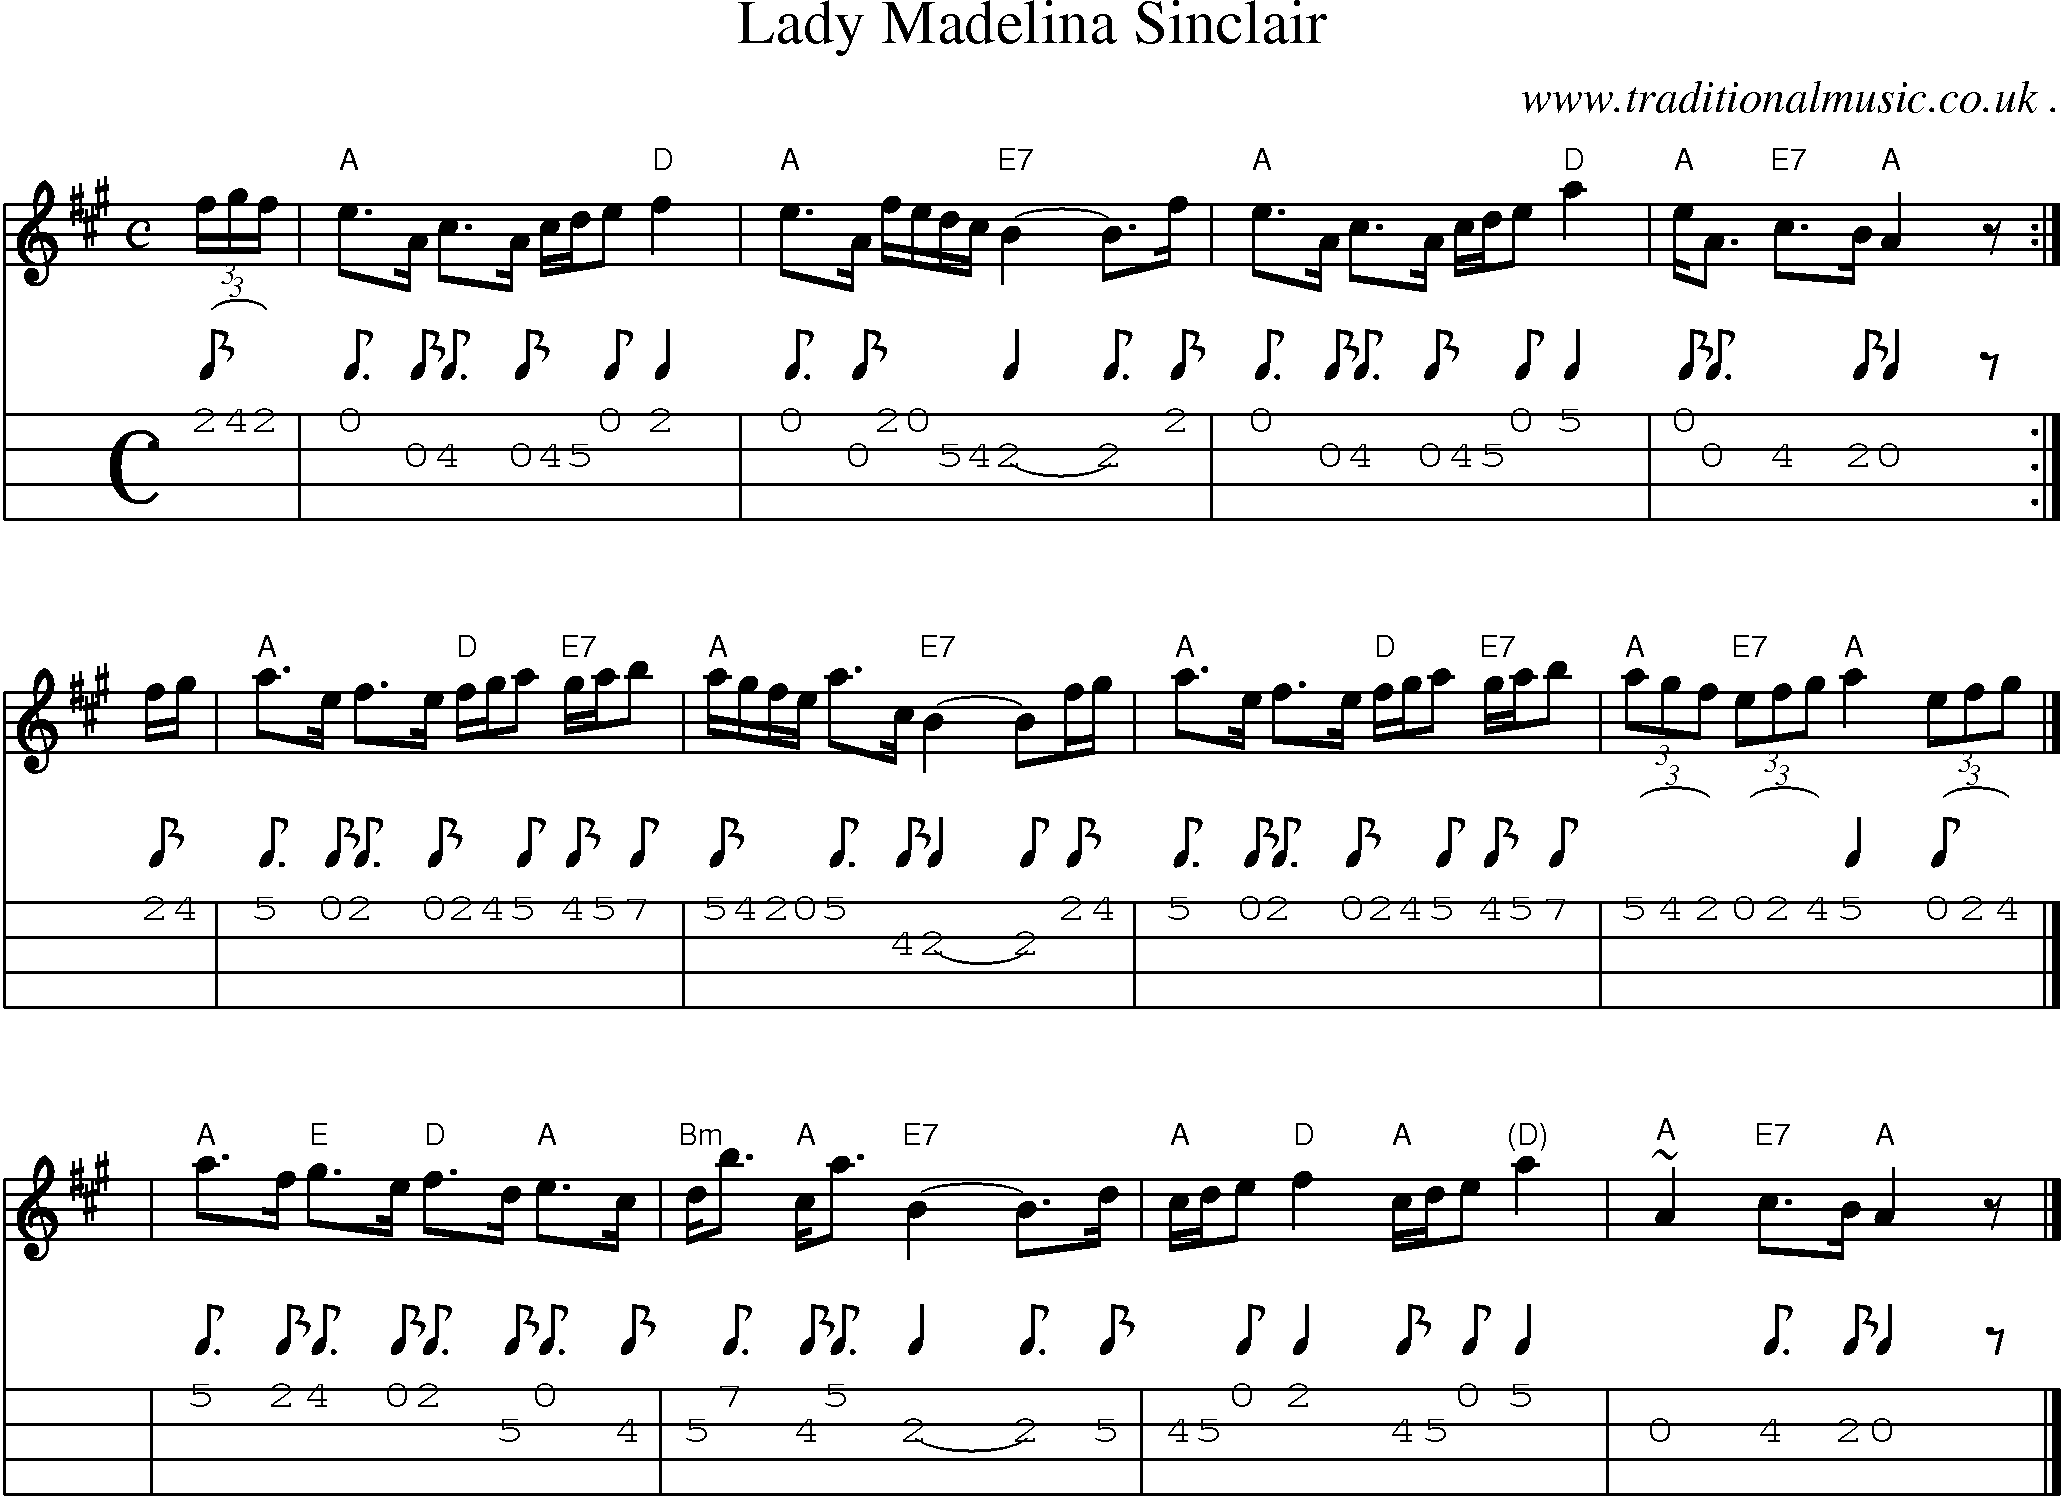 Sheet-music  score, Chords and Mandolin Tabs for Lady Madelina Sinclair